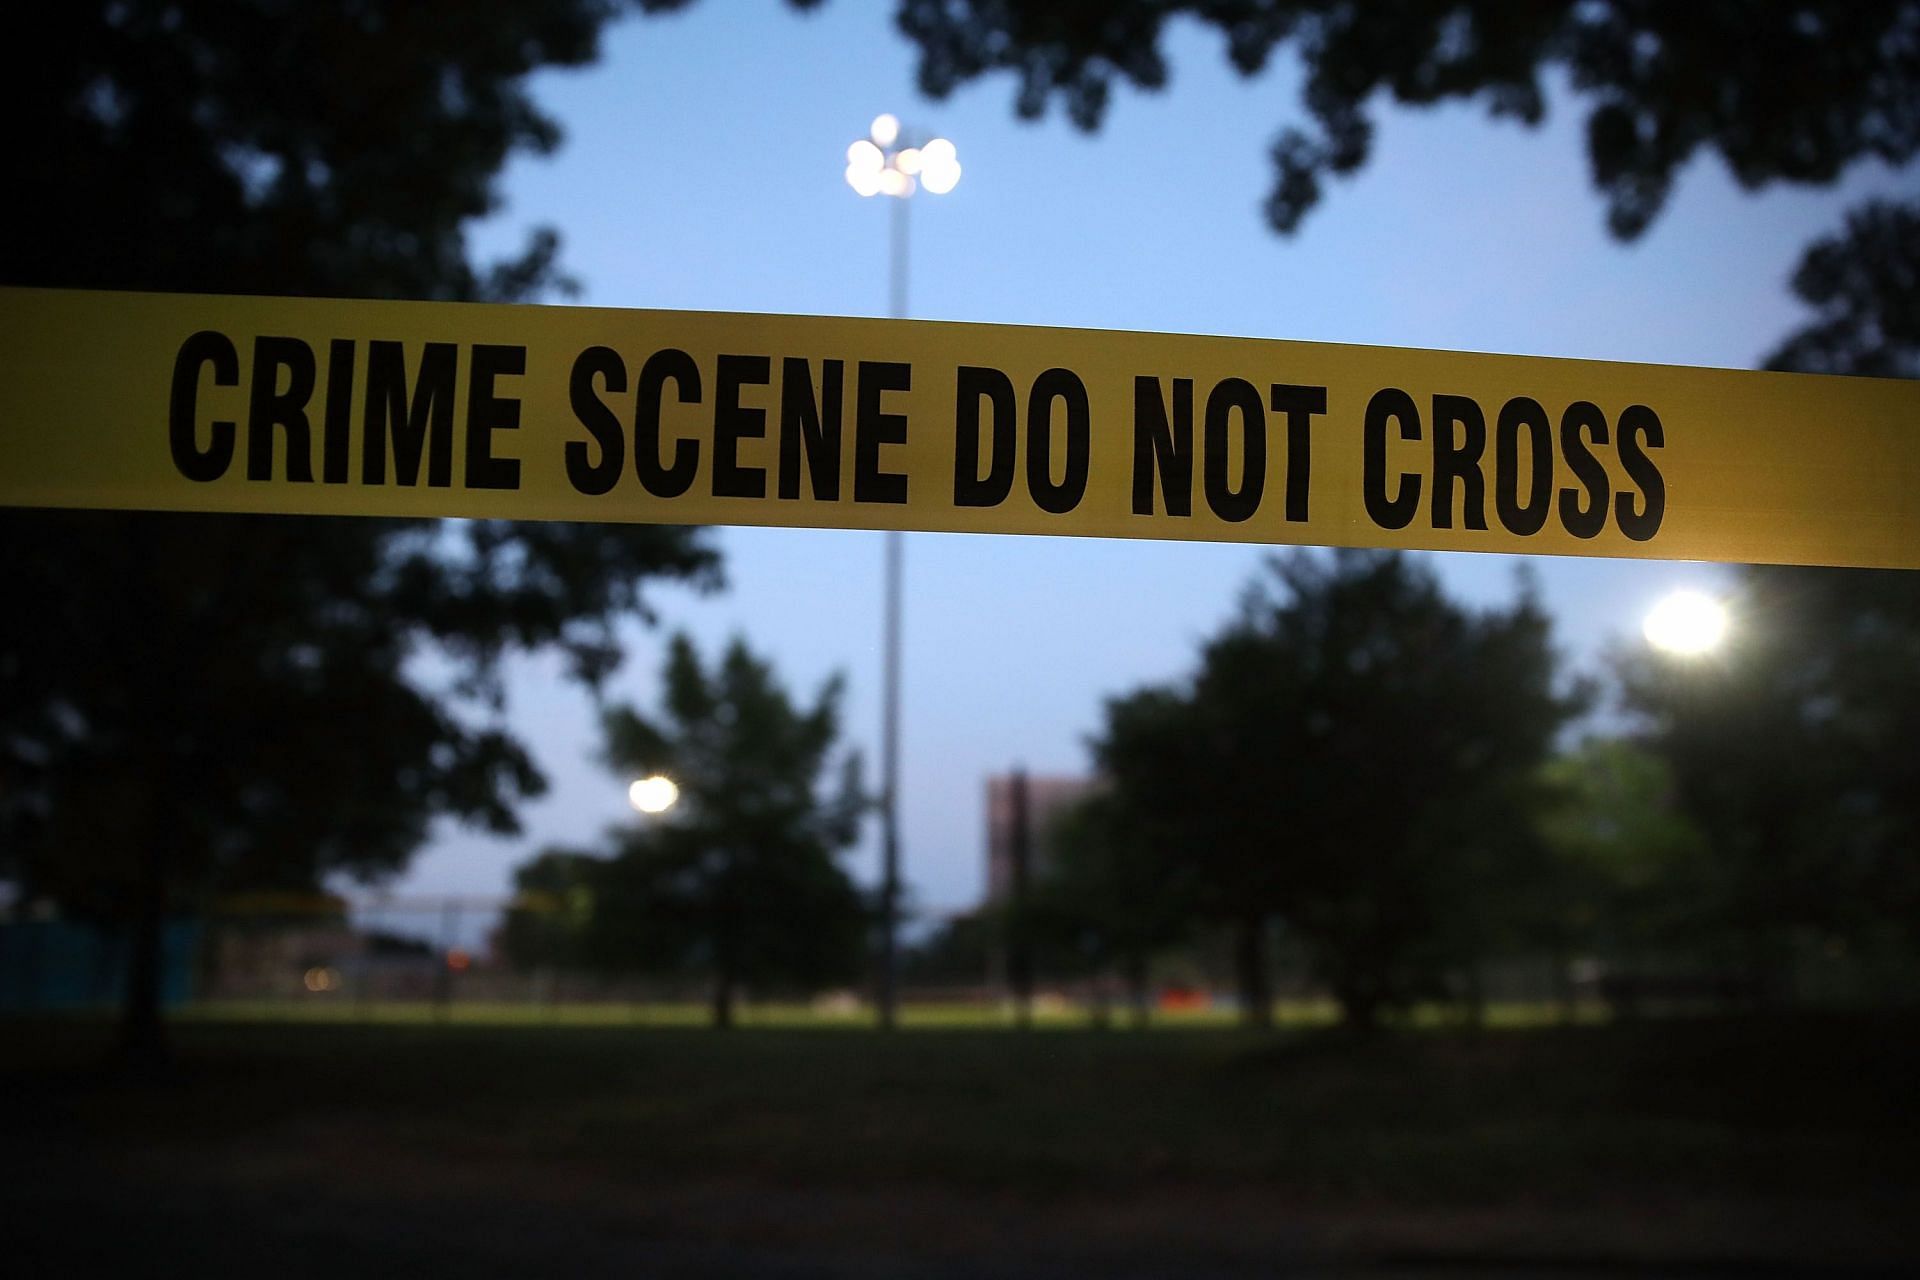 Investigation Continues At Site Of Congressional Baseball Shooting Incident